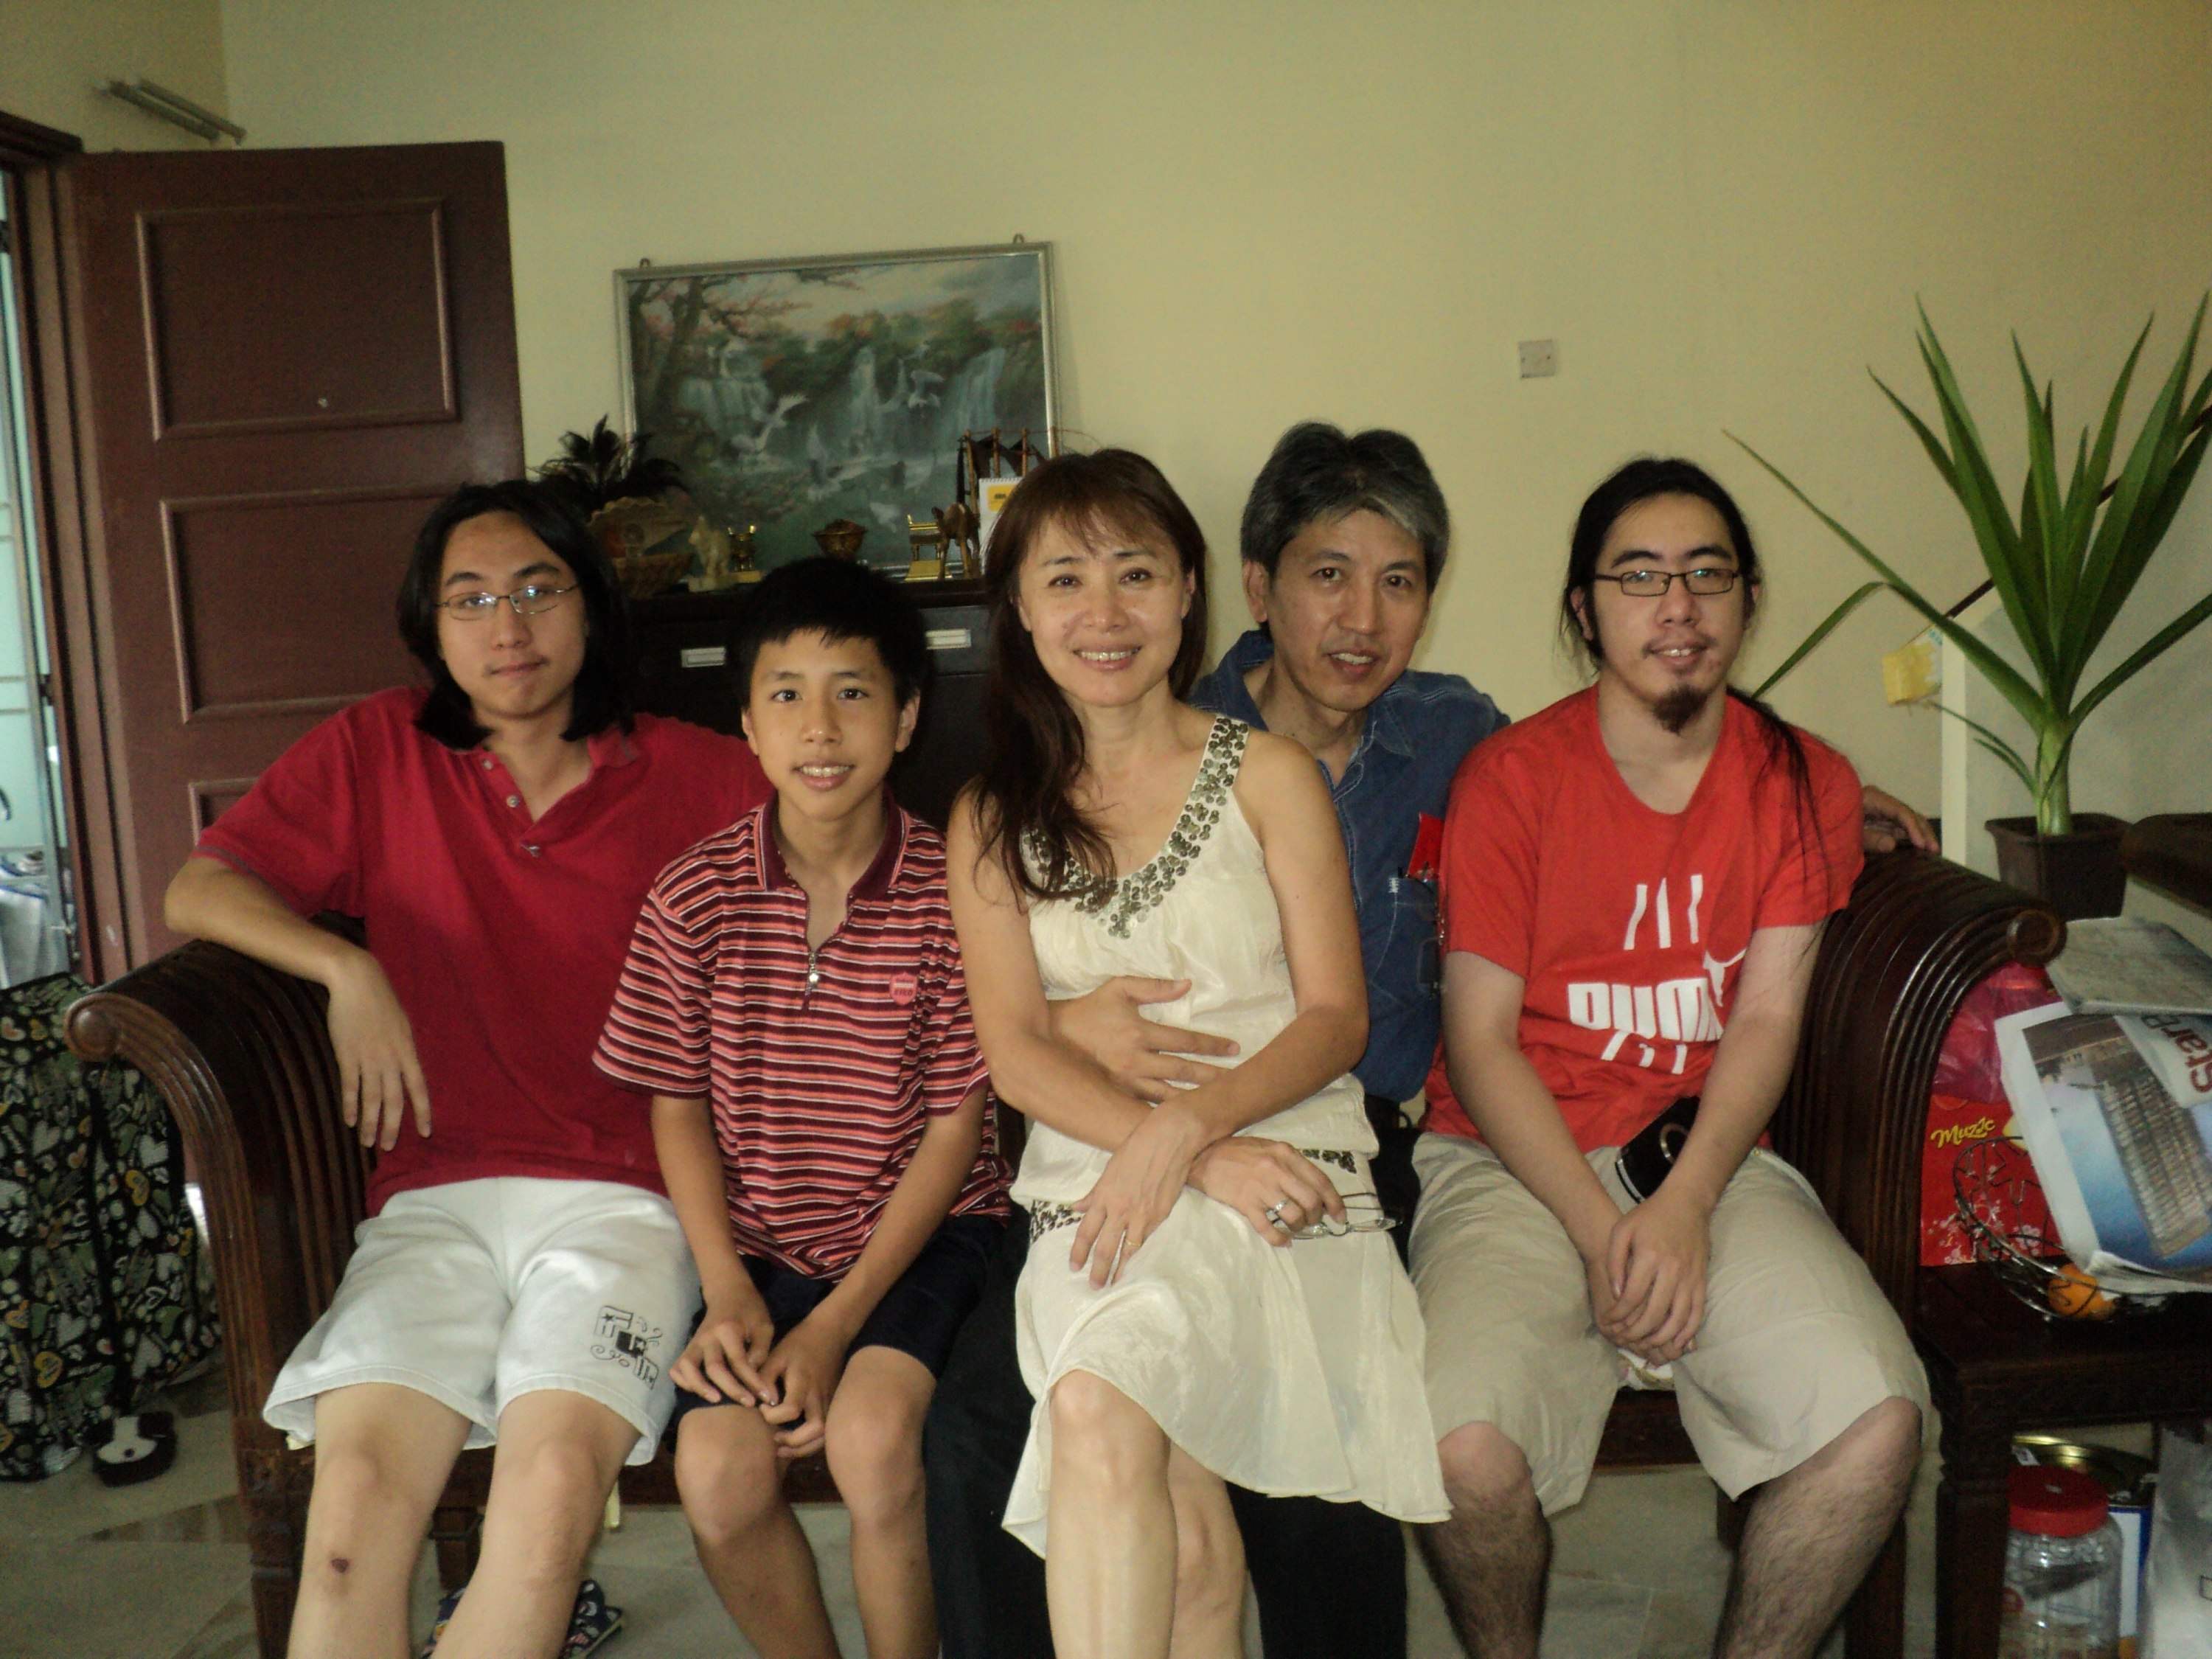 Andy in the blue shirt, and his family. Pic used with permission